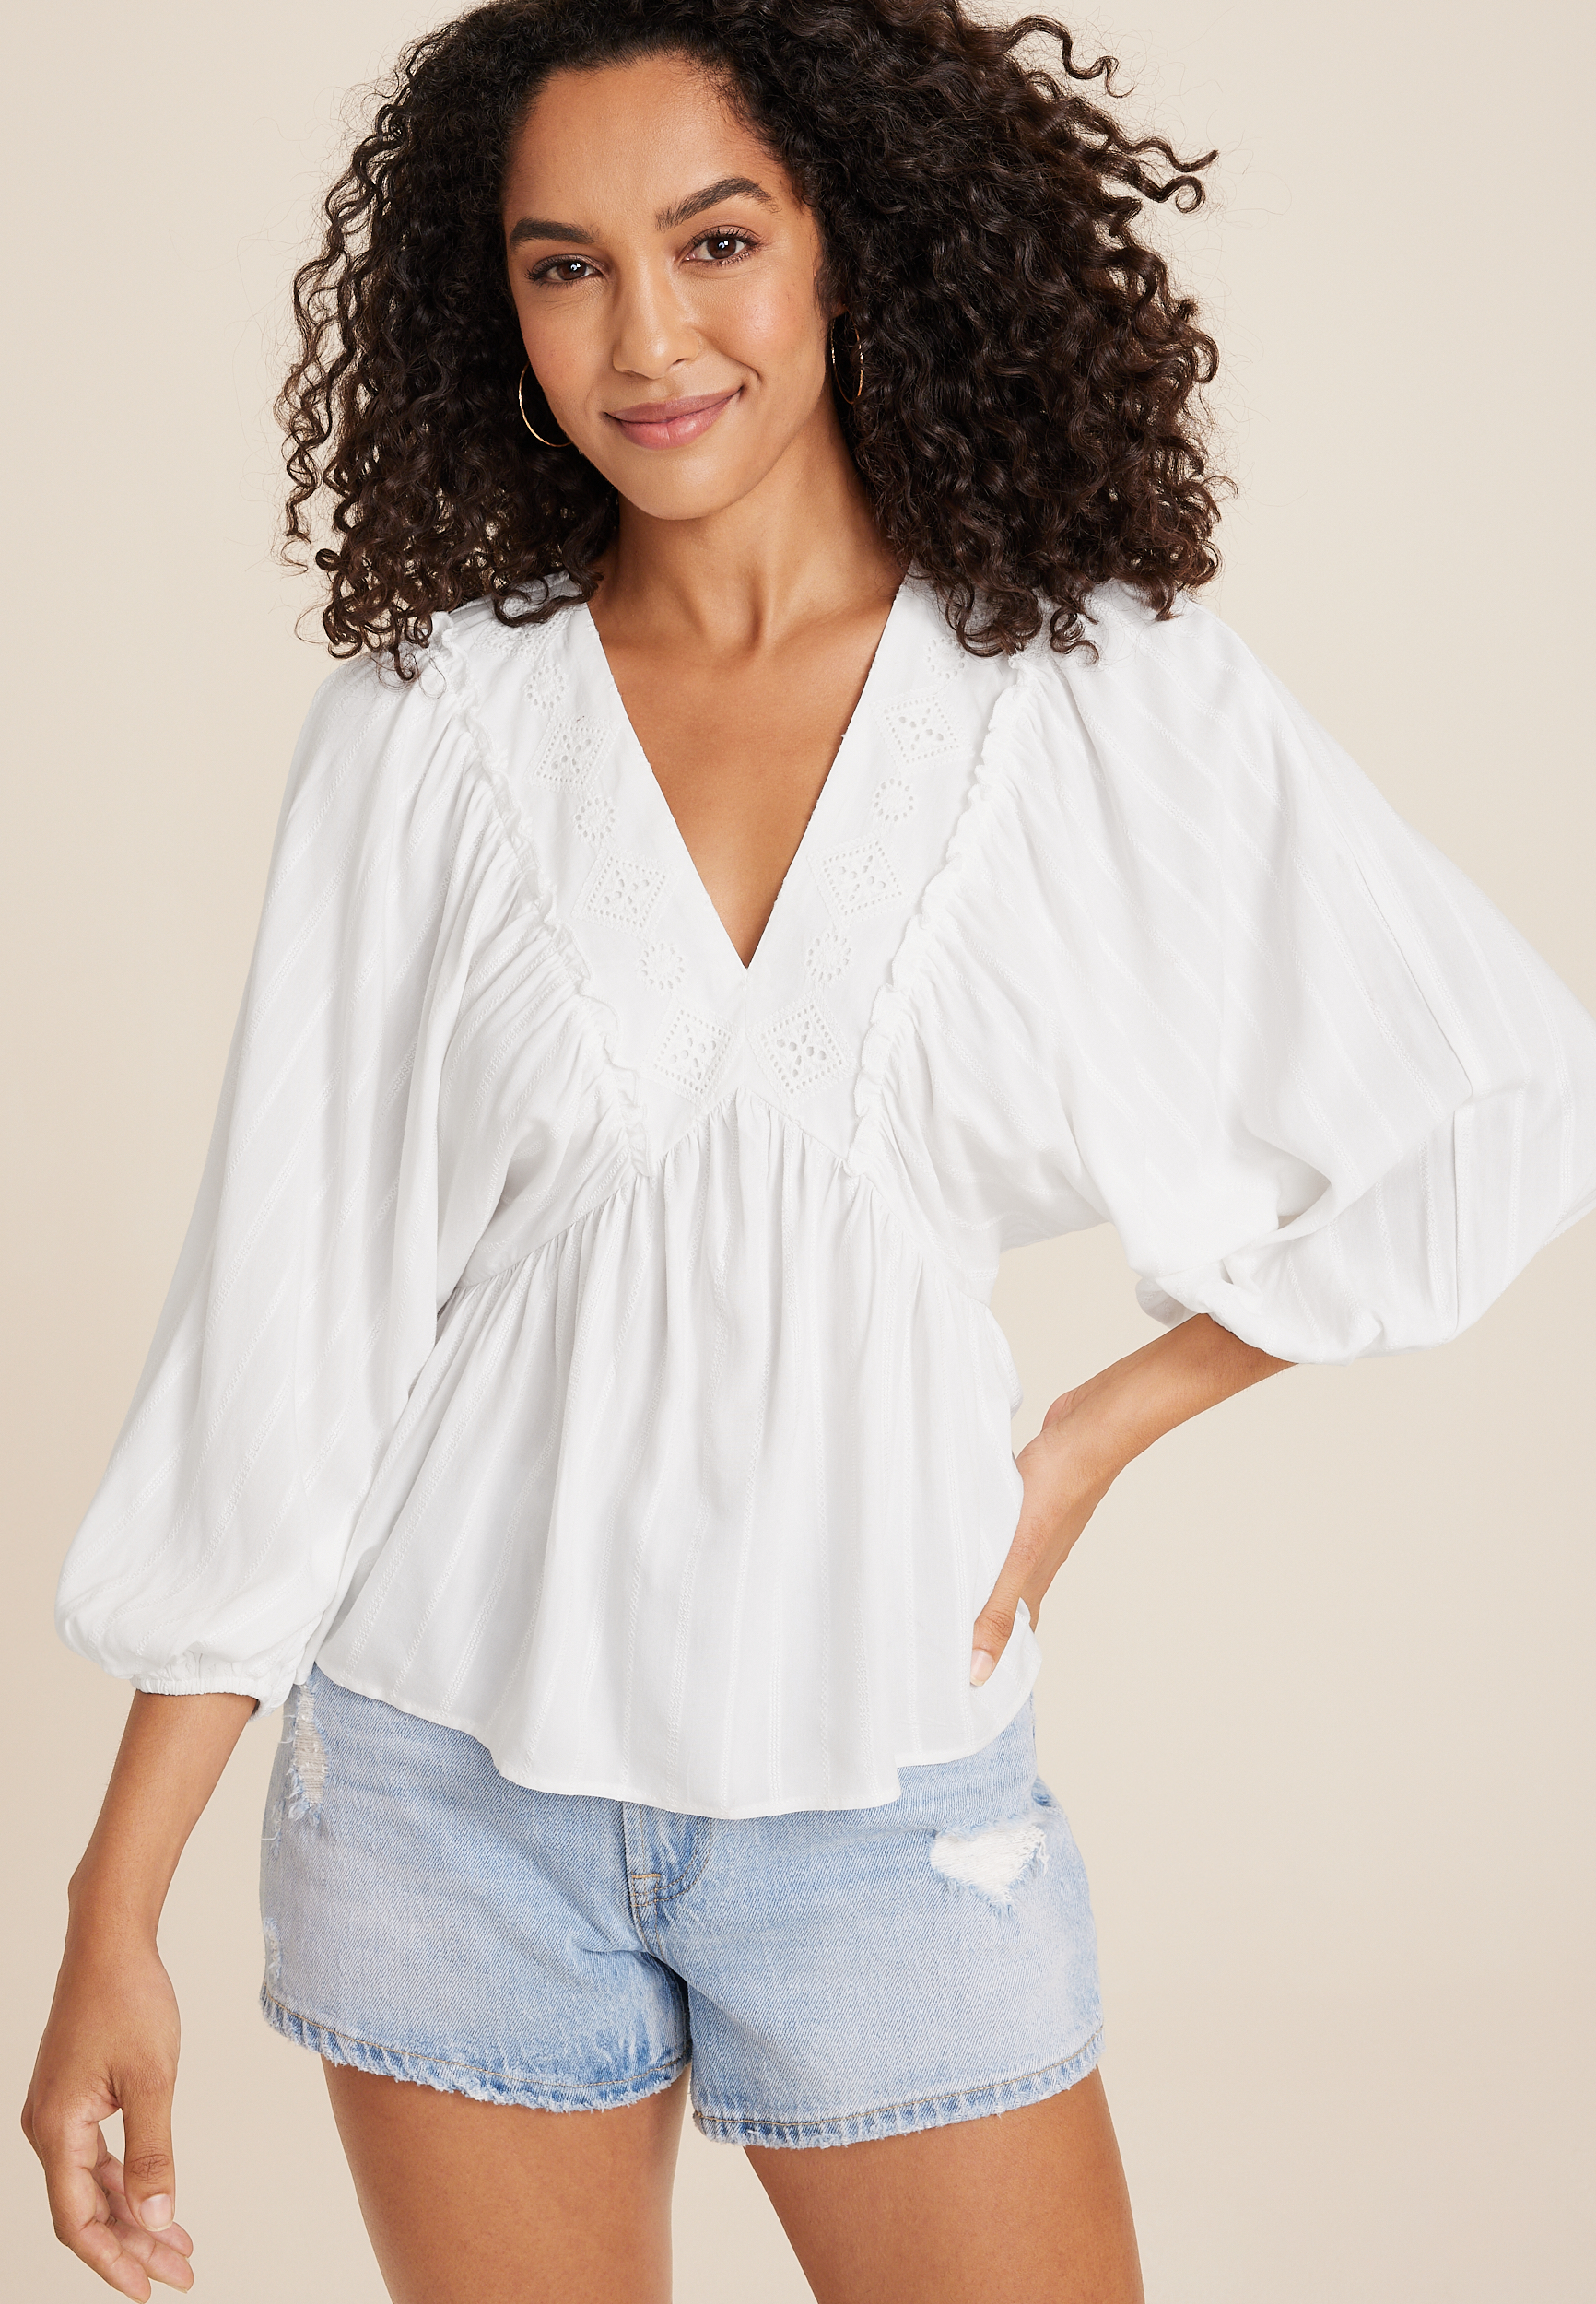 Women\'s Shirts & Blouses: Flowy, Floral, Peasant & More | maurices